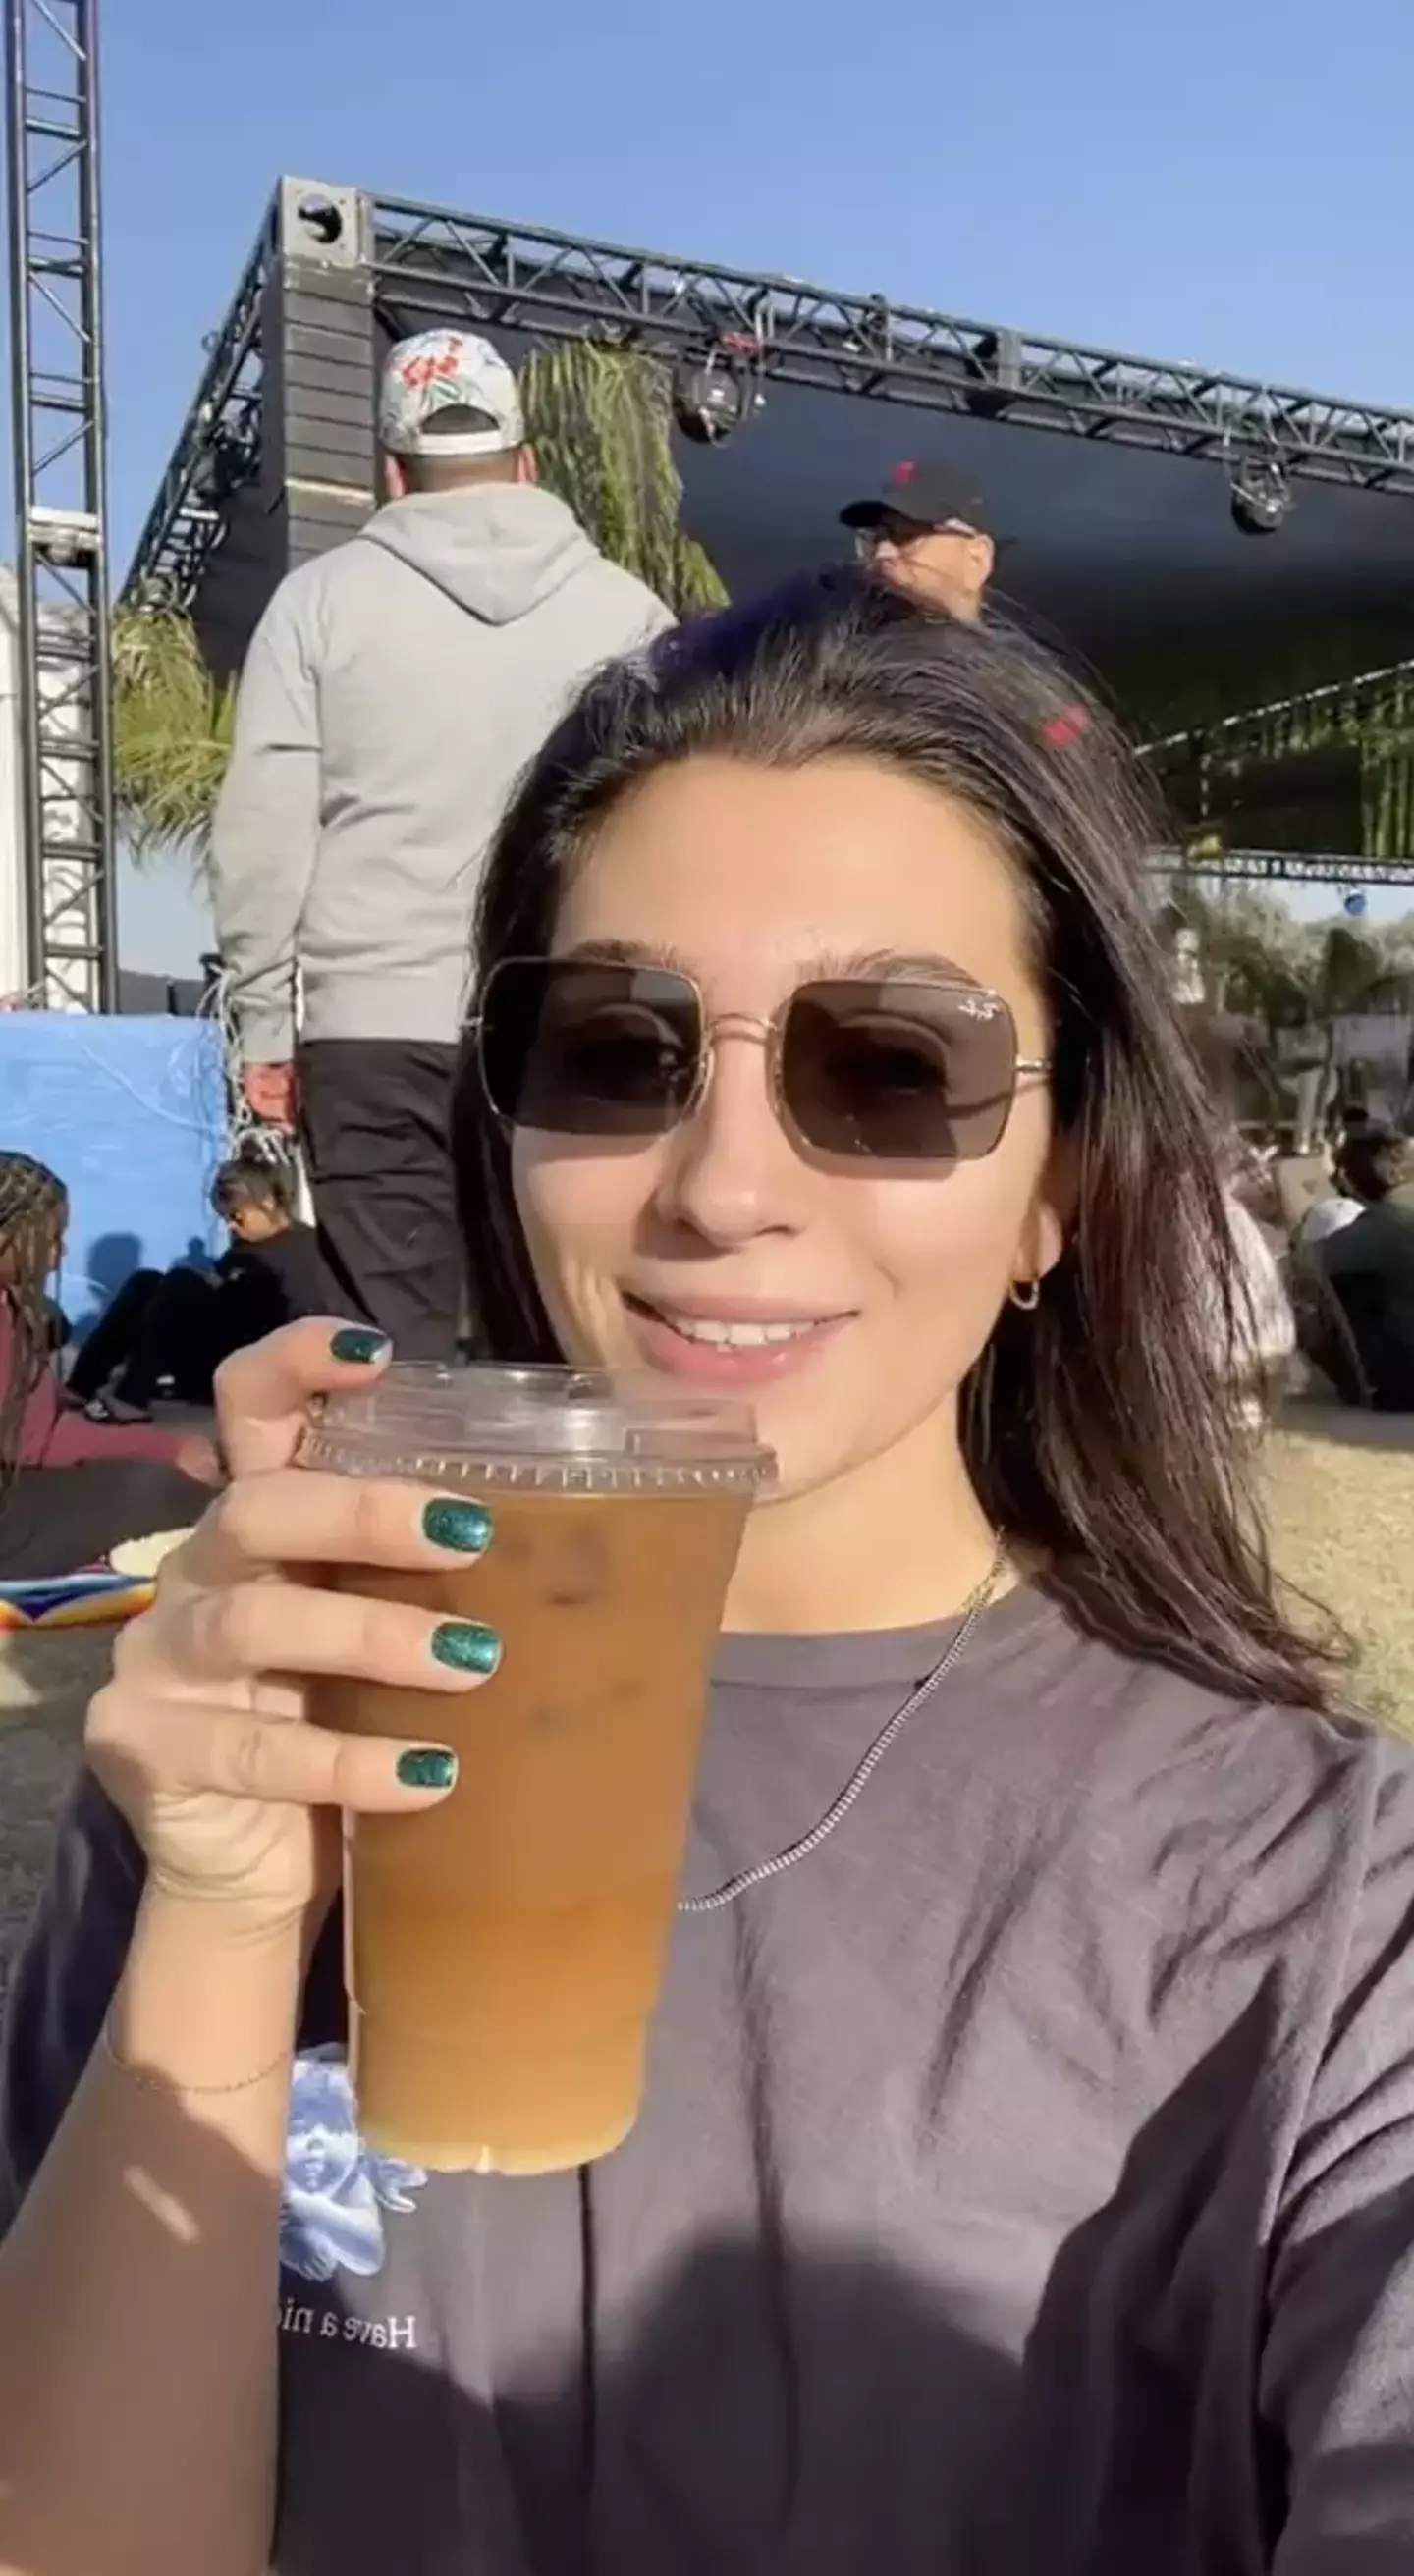 People are totally shocked to discover the prices of food and drink at Coachella.